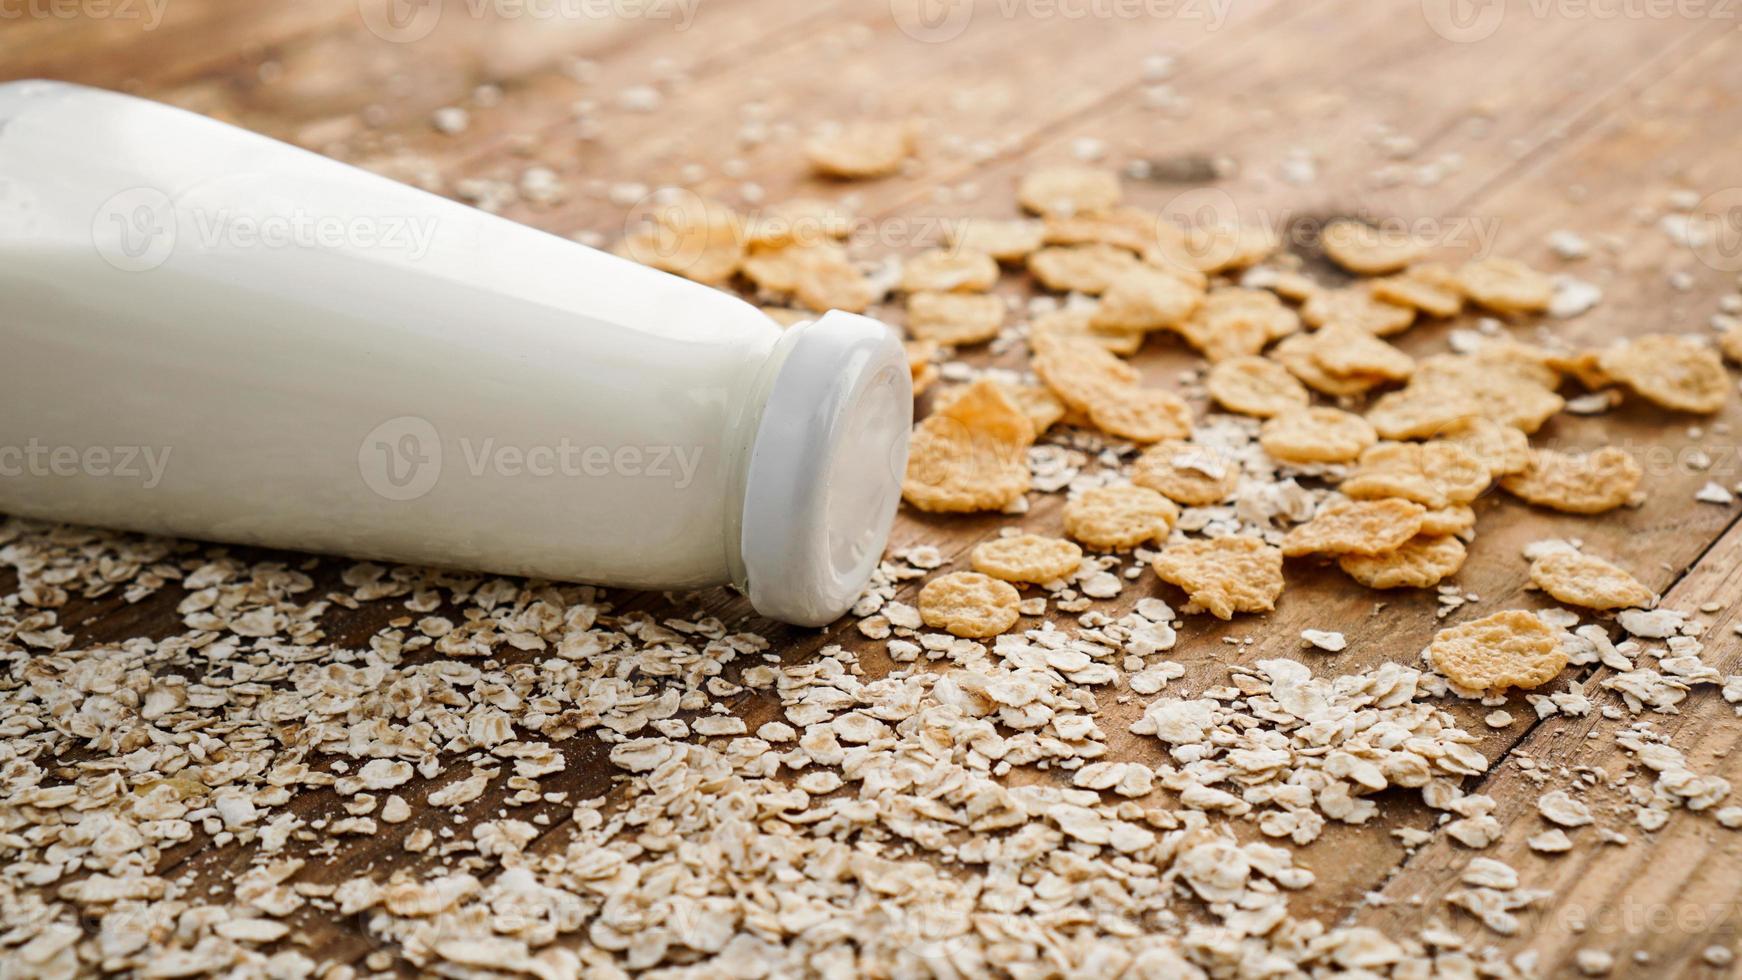 Fresh milk bottle on wooden background with oats and cereals photo